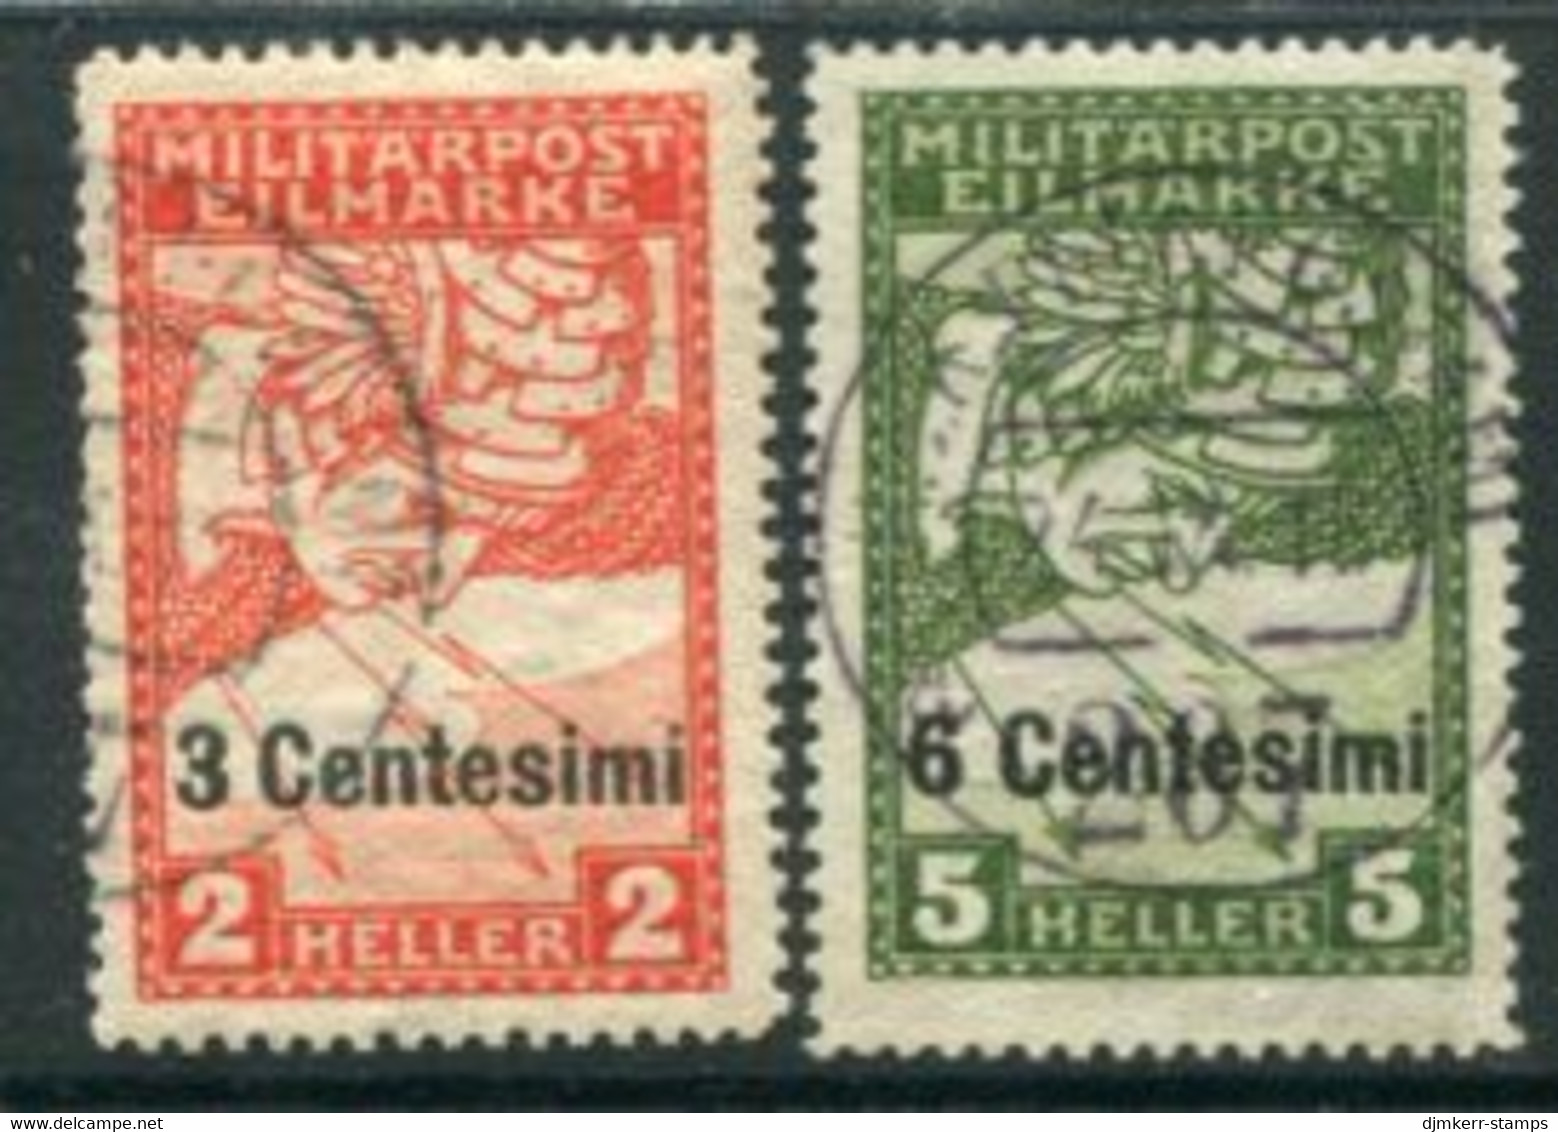 AUSTRIAN FELDPOST In ITALY 1917 Overprint On Newspaper Express Stamps. Used.  Michel 24-25 - Usati